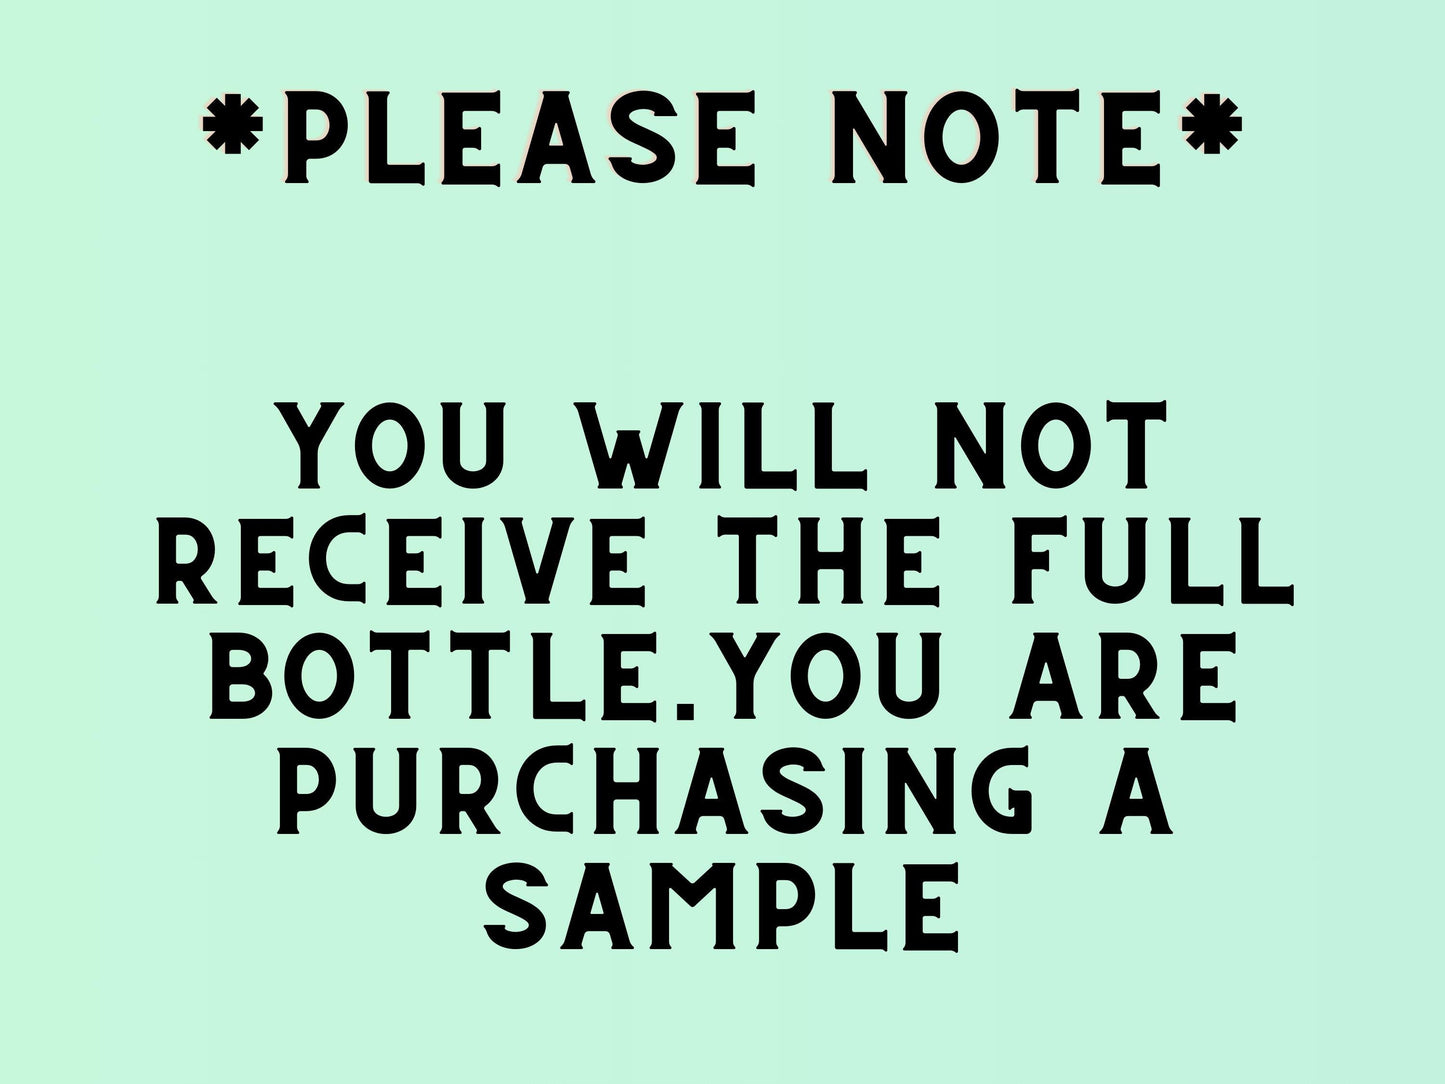 5ML SAMPLE SIZE Champagne Toast Fine Fragrance Mist | Bath and Body Works